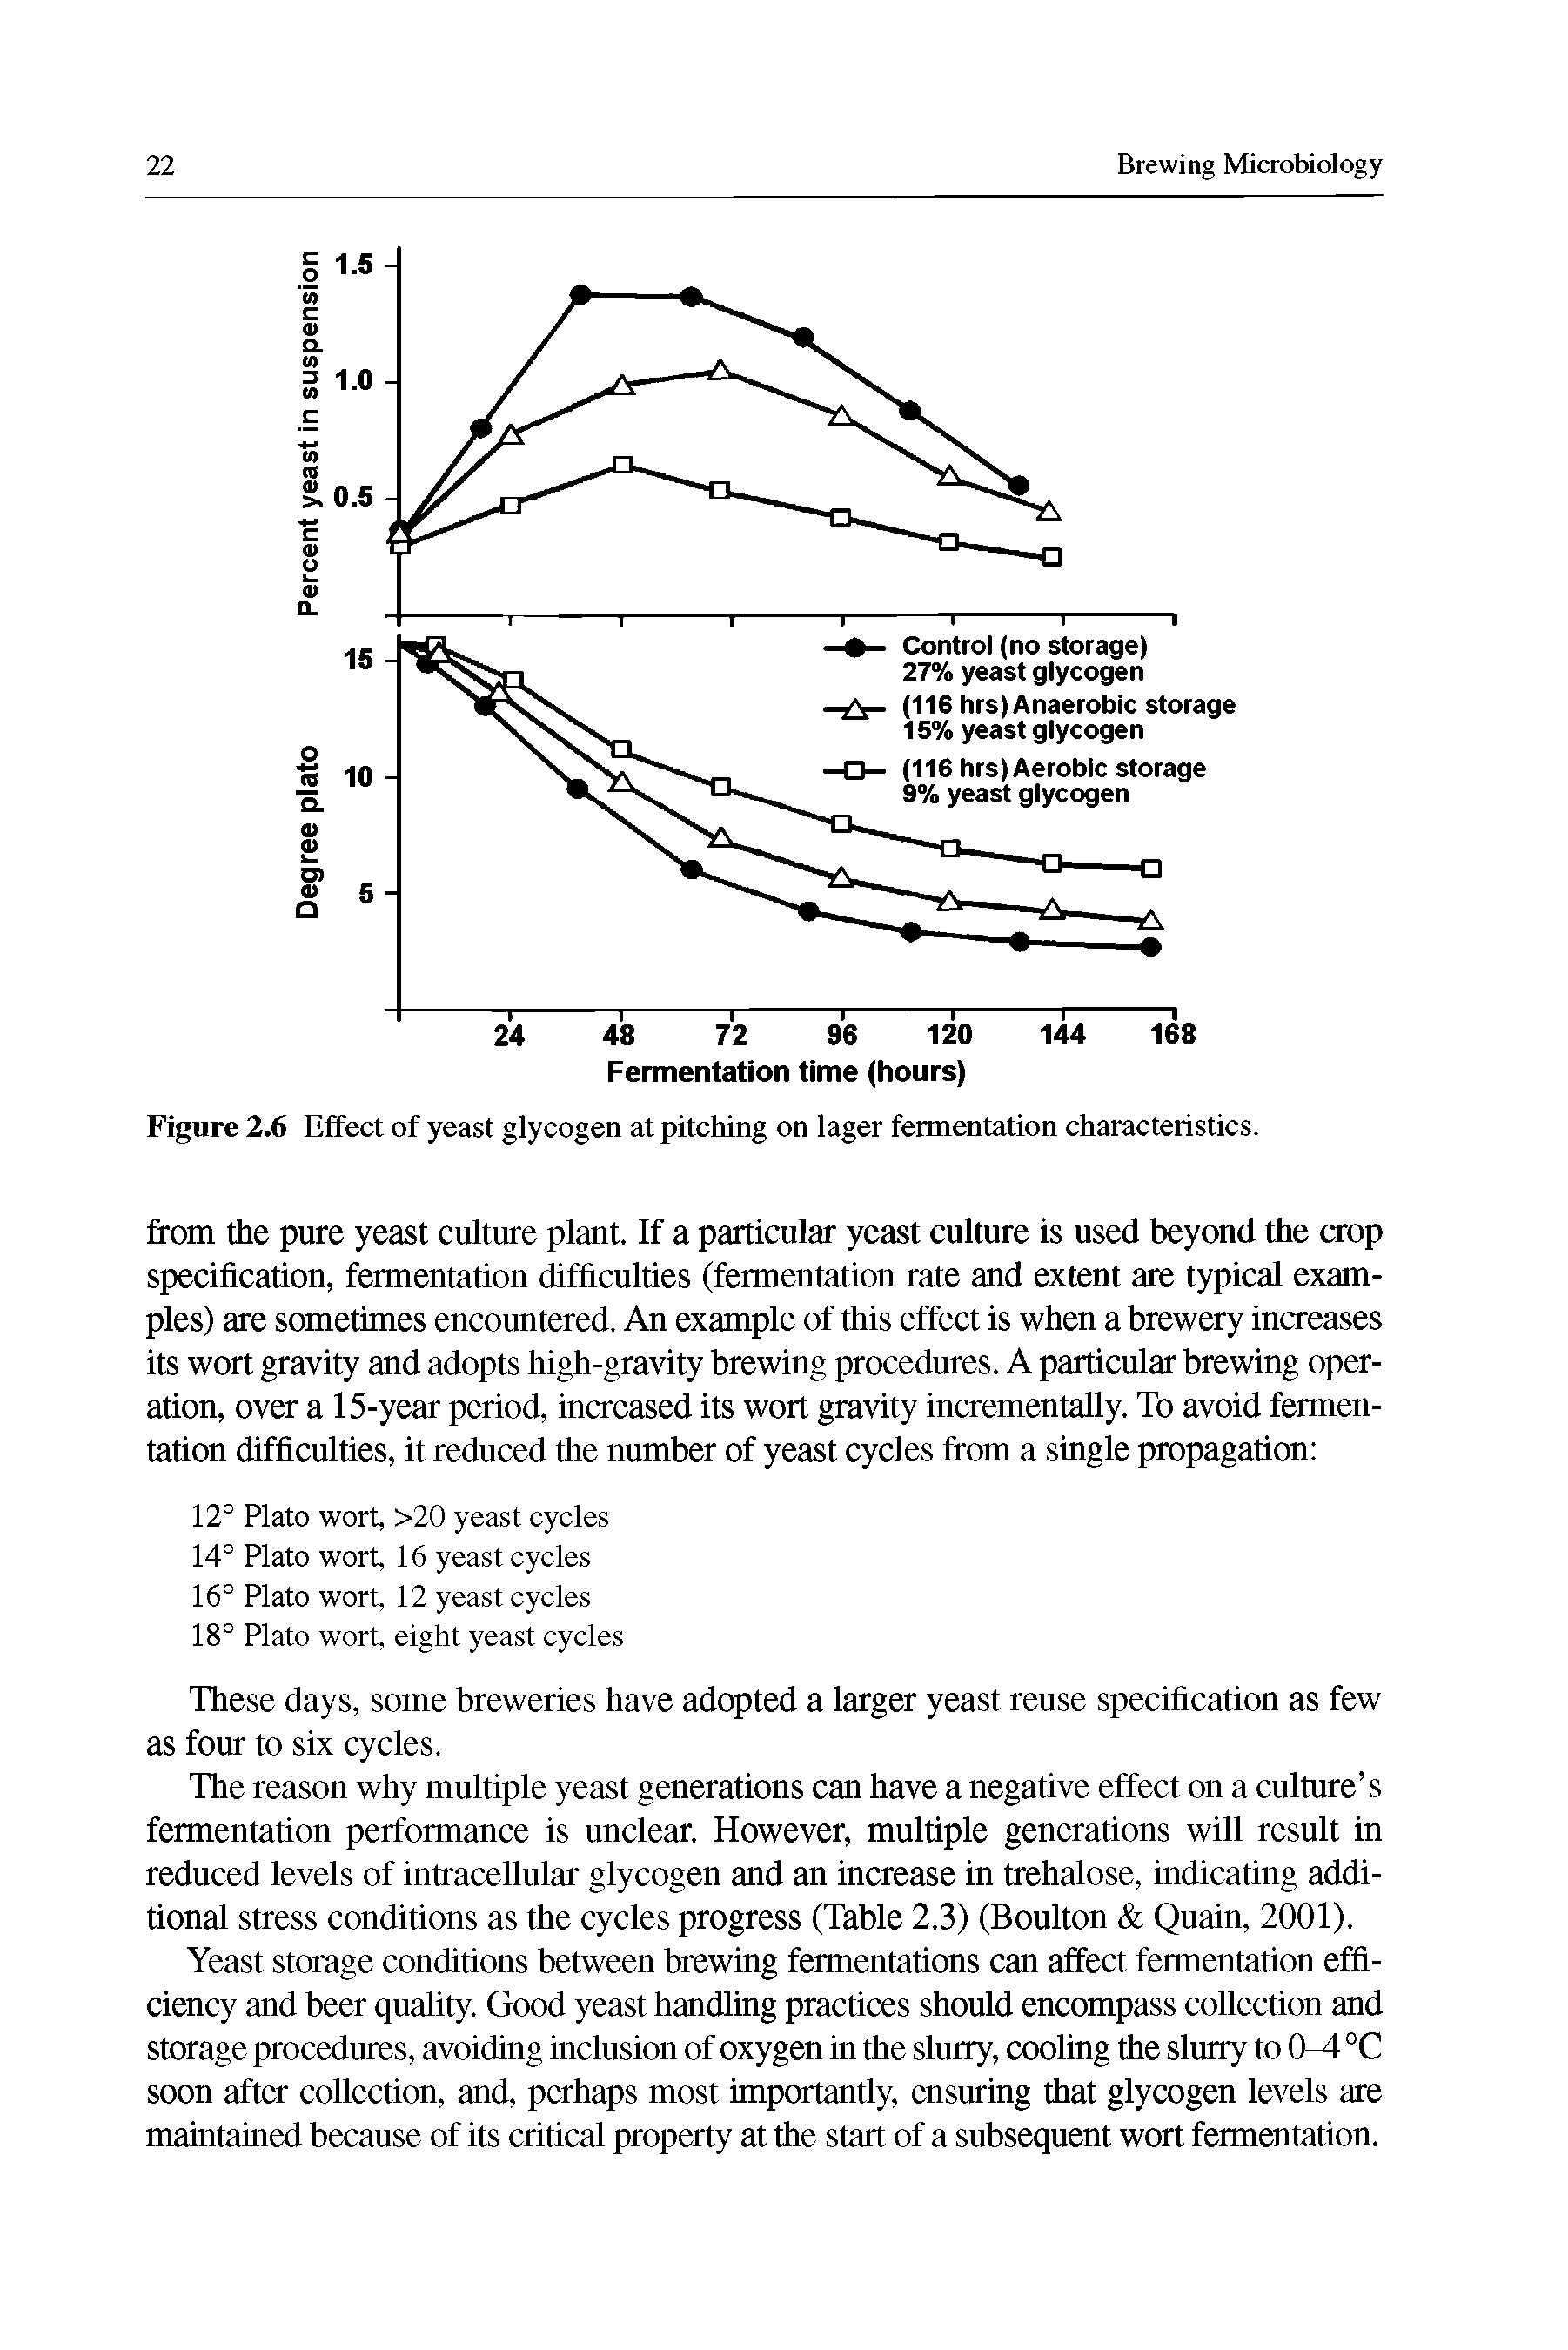 Figure 2.6 Effect of yeast glycogen at pitching on lager fermentation characteristics.